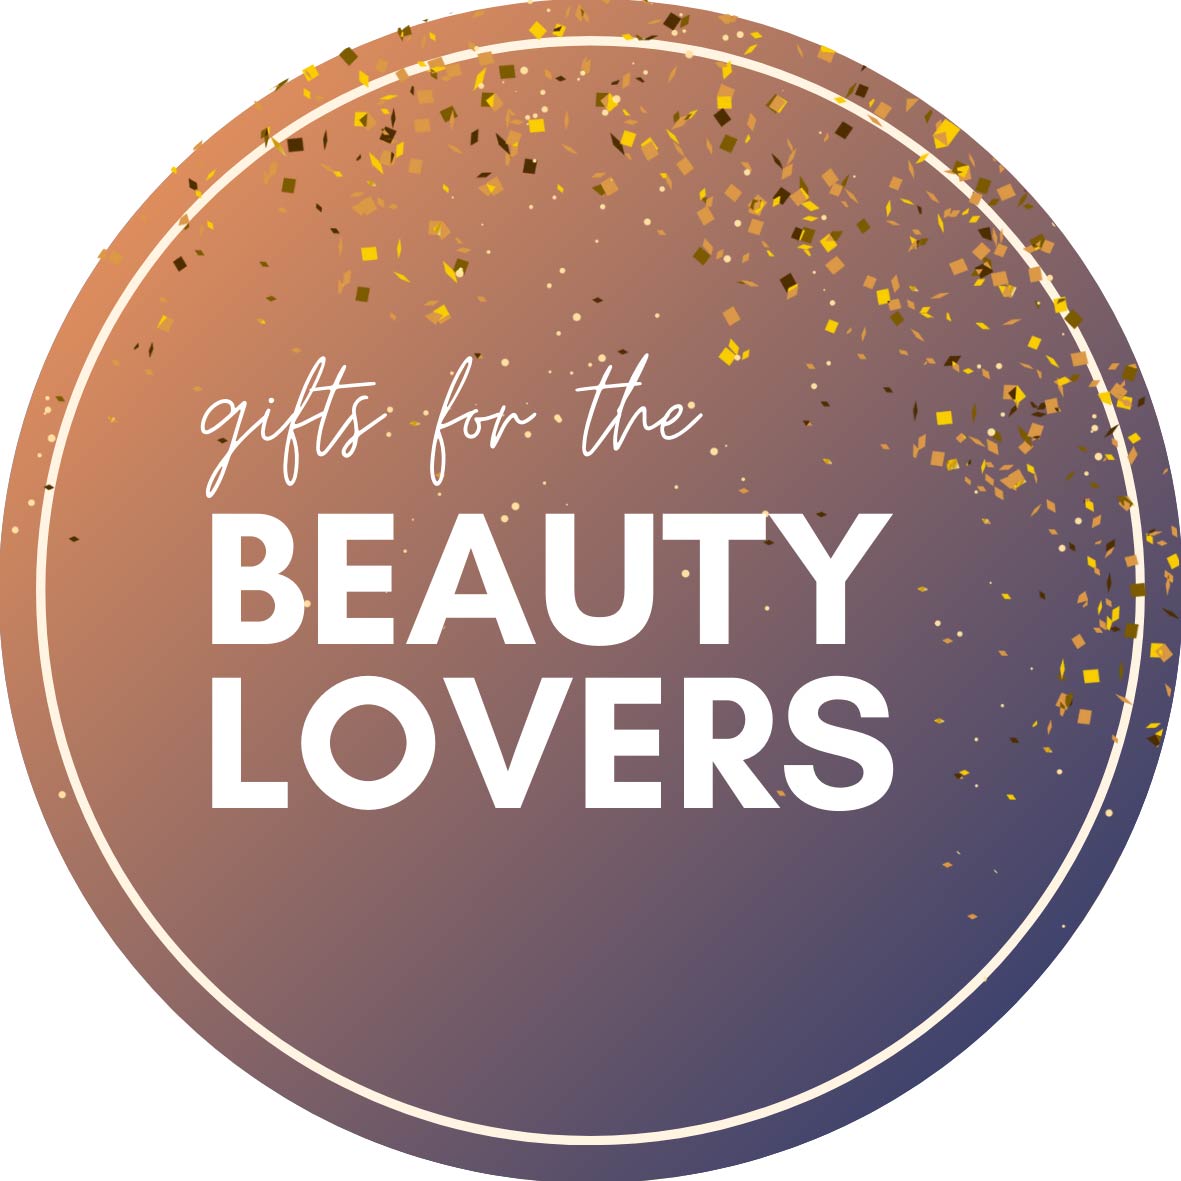 gift ideas, gift ideas for the beauty lovers